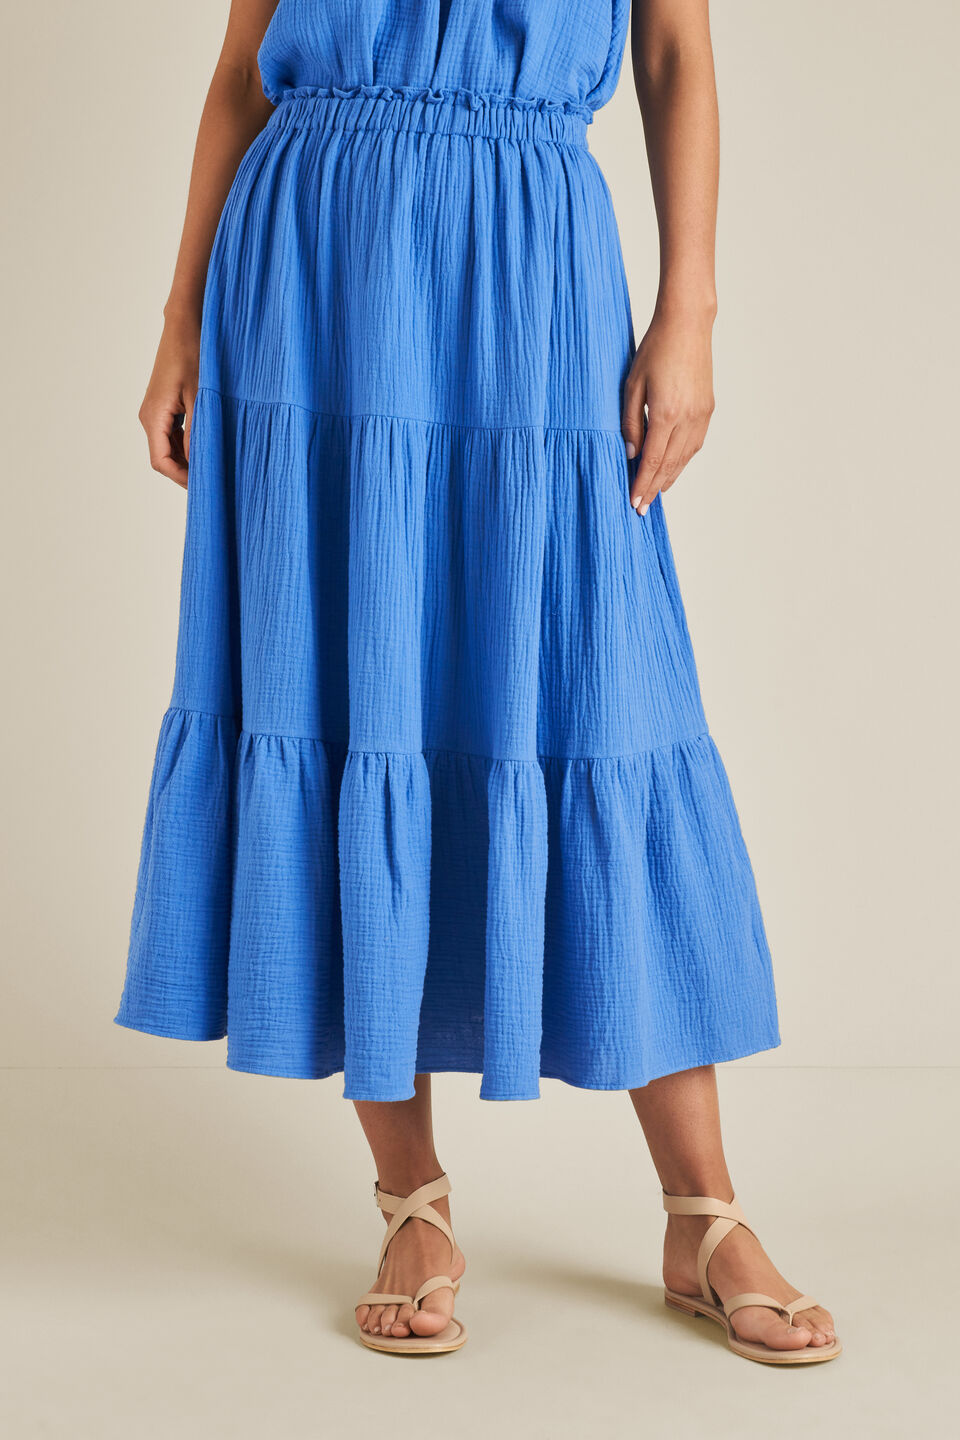 Cheesecloth Skirt  